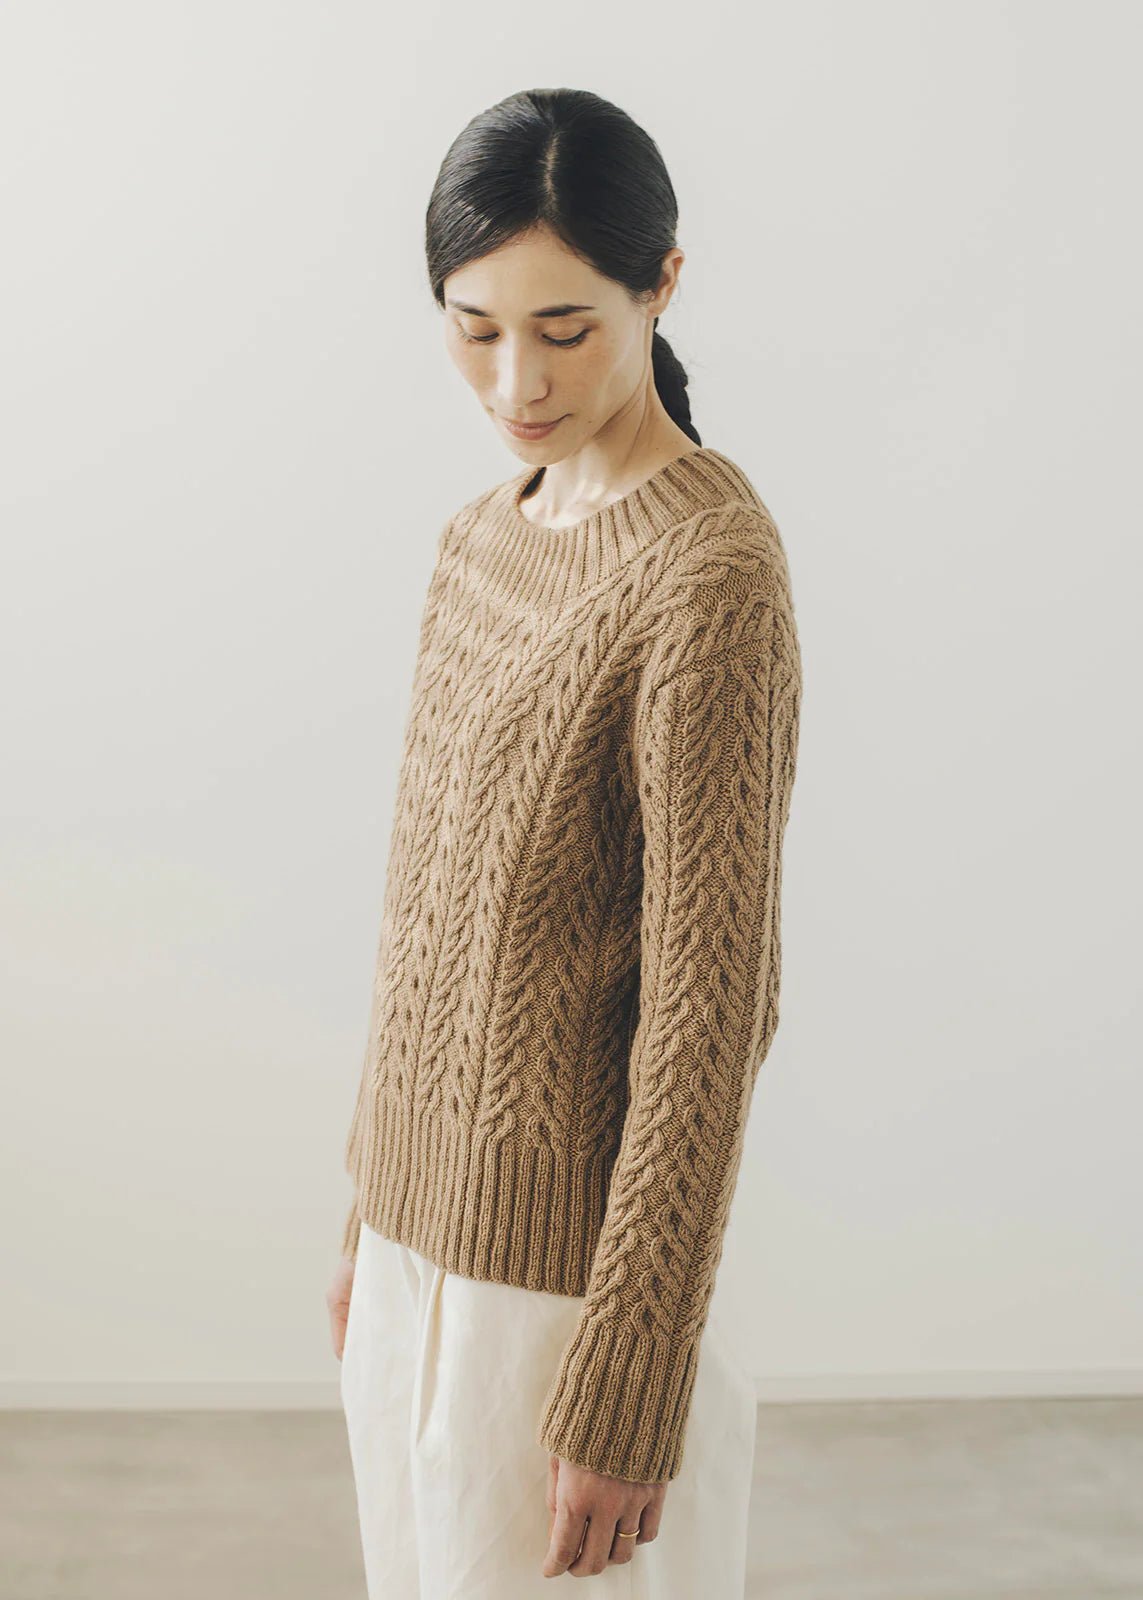 Nomad Knits: A Collection with Nomadnoos - Amirisu - The Little Yarn Store